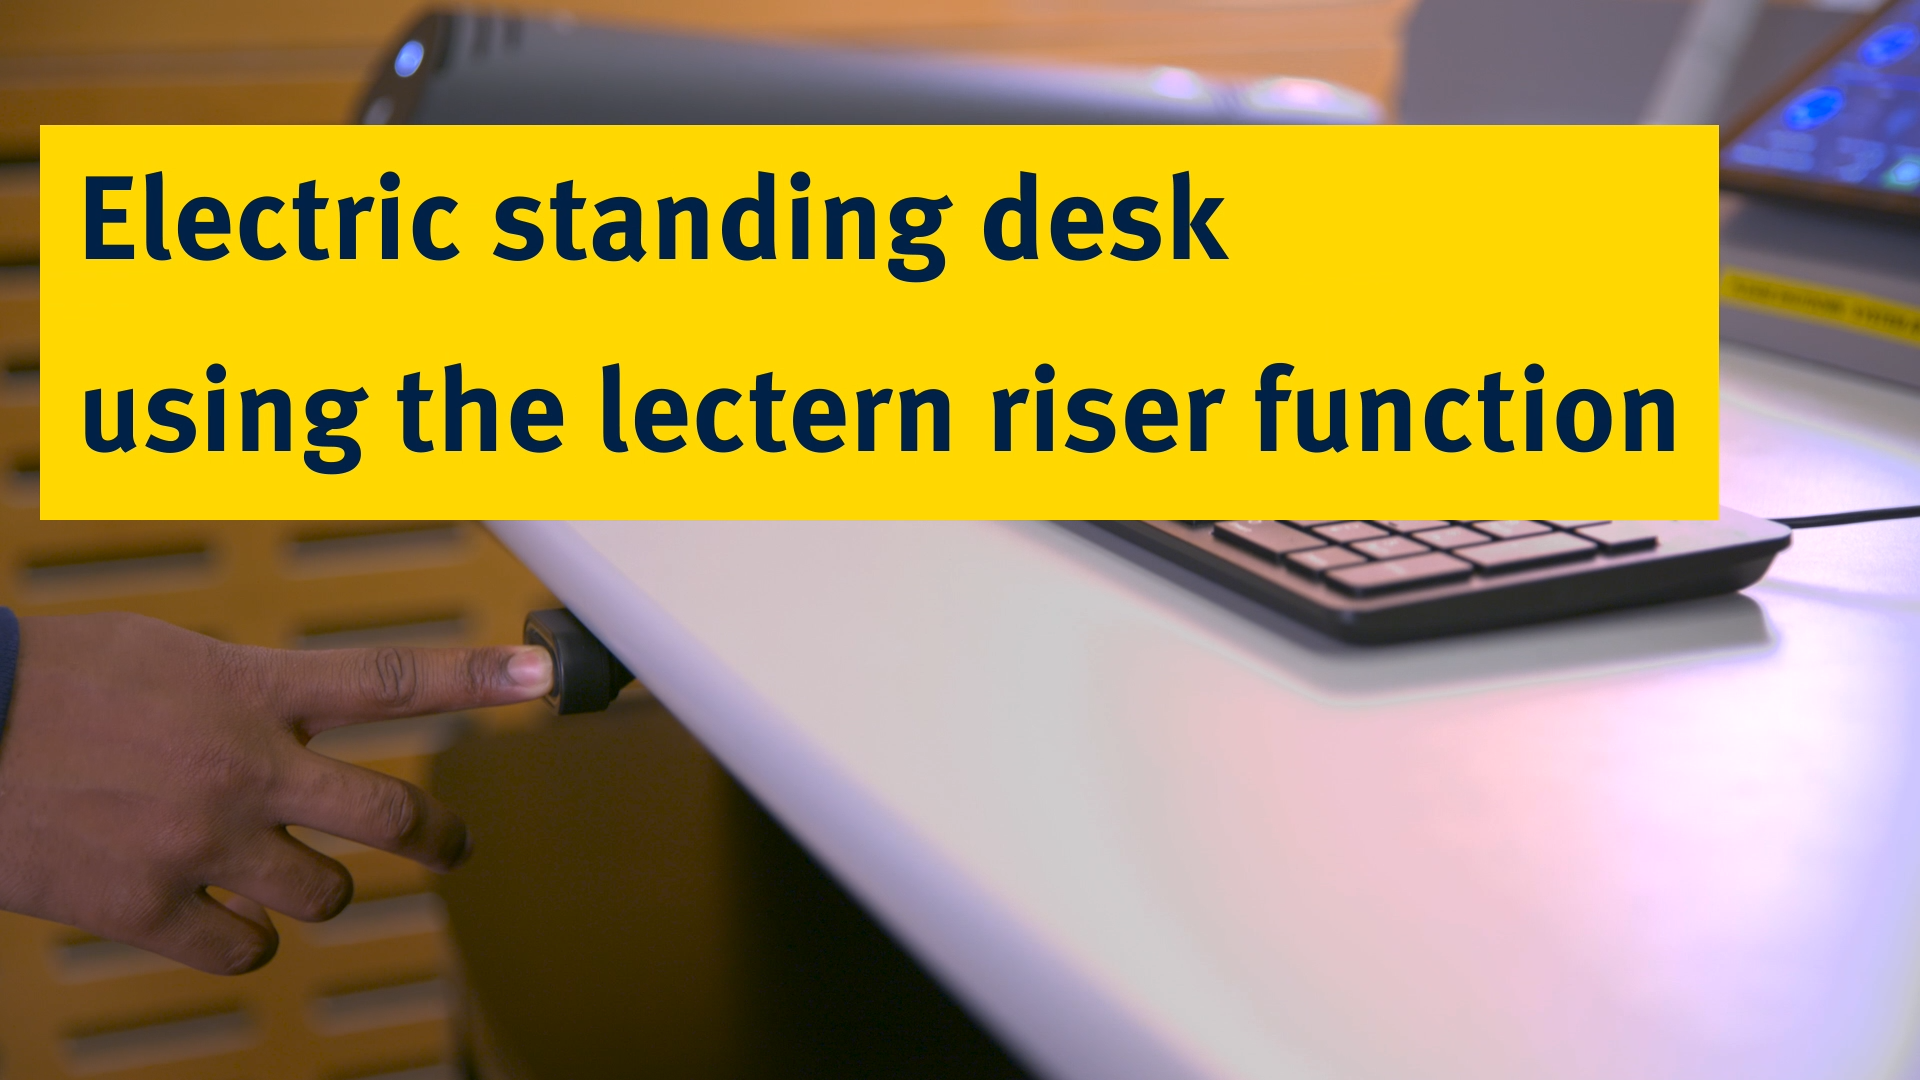 If you have a rise and fall lectern in your room